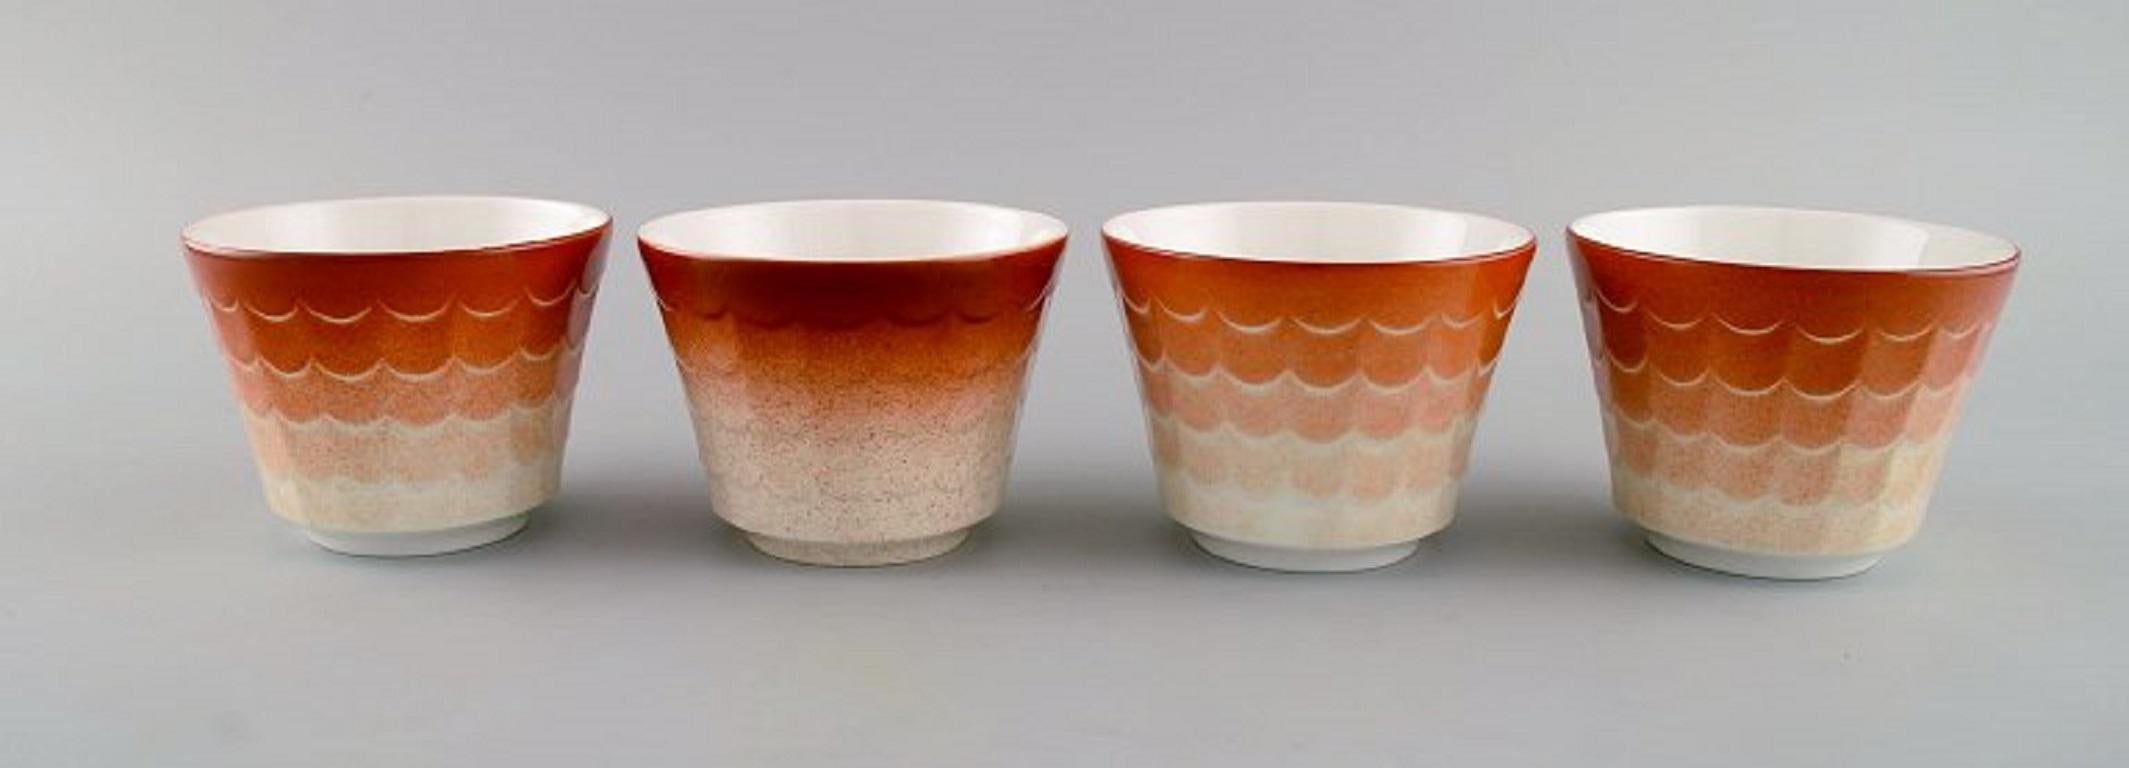 Wilhelm Kåge for Gustavsberg. Four flower pot covers in porcelain. Swedish design, 1960s.
Measures: 10,5 x 8 cm.
In excellent condition.
Stamped.